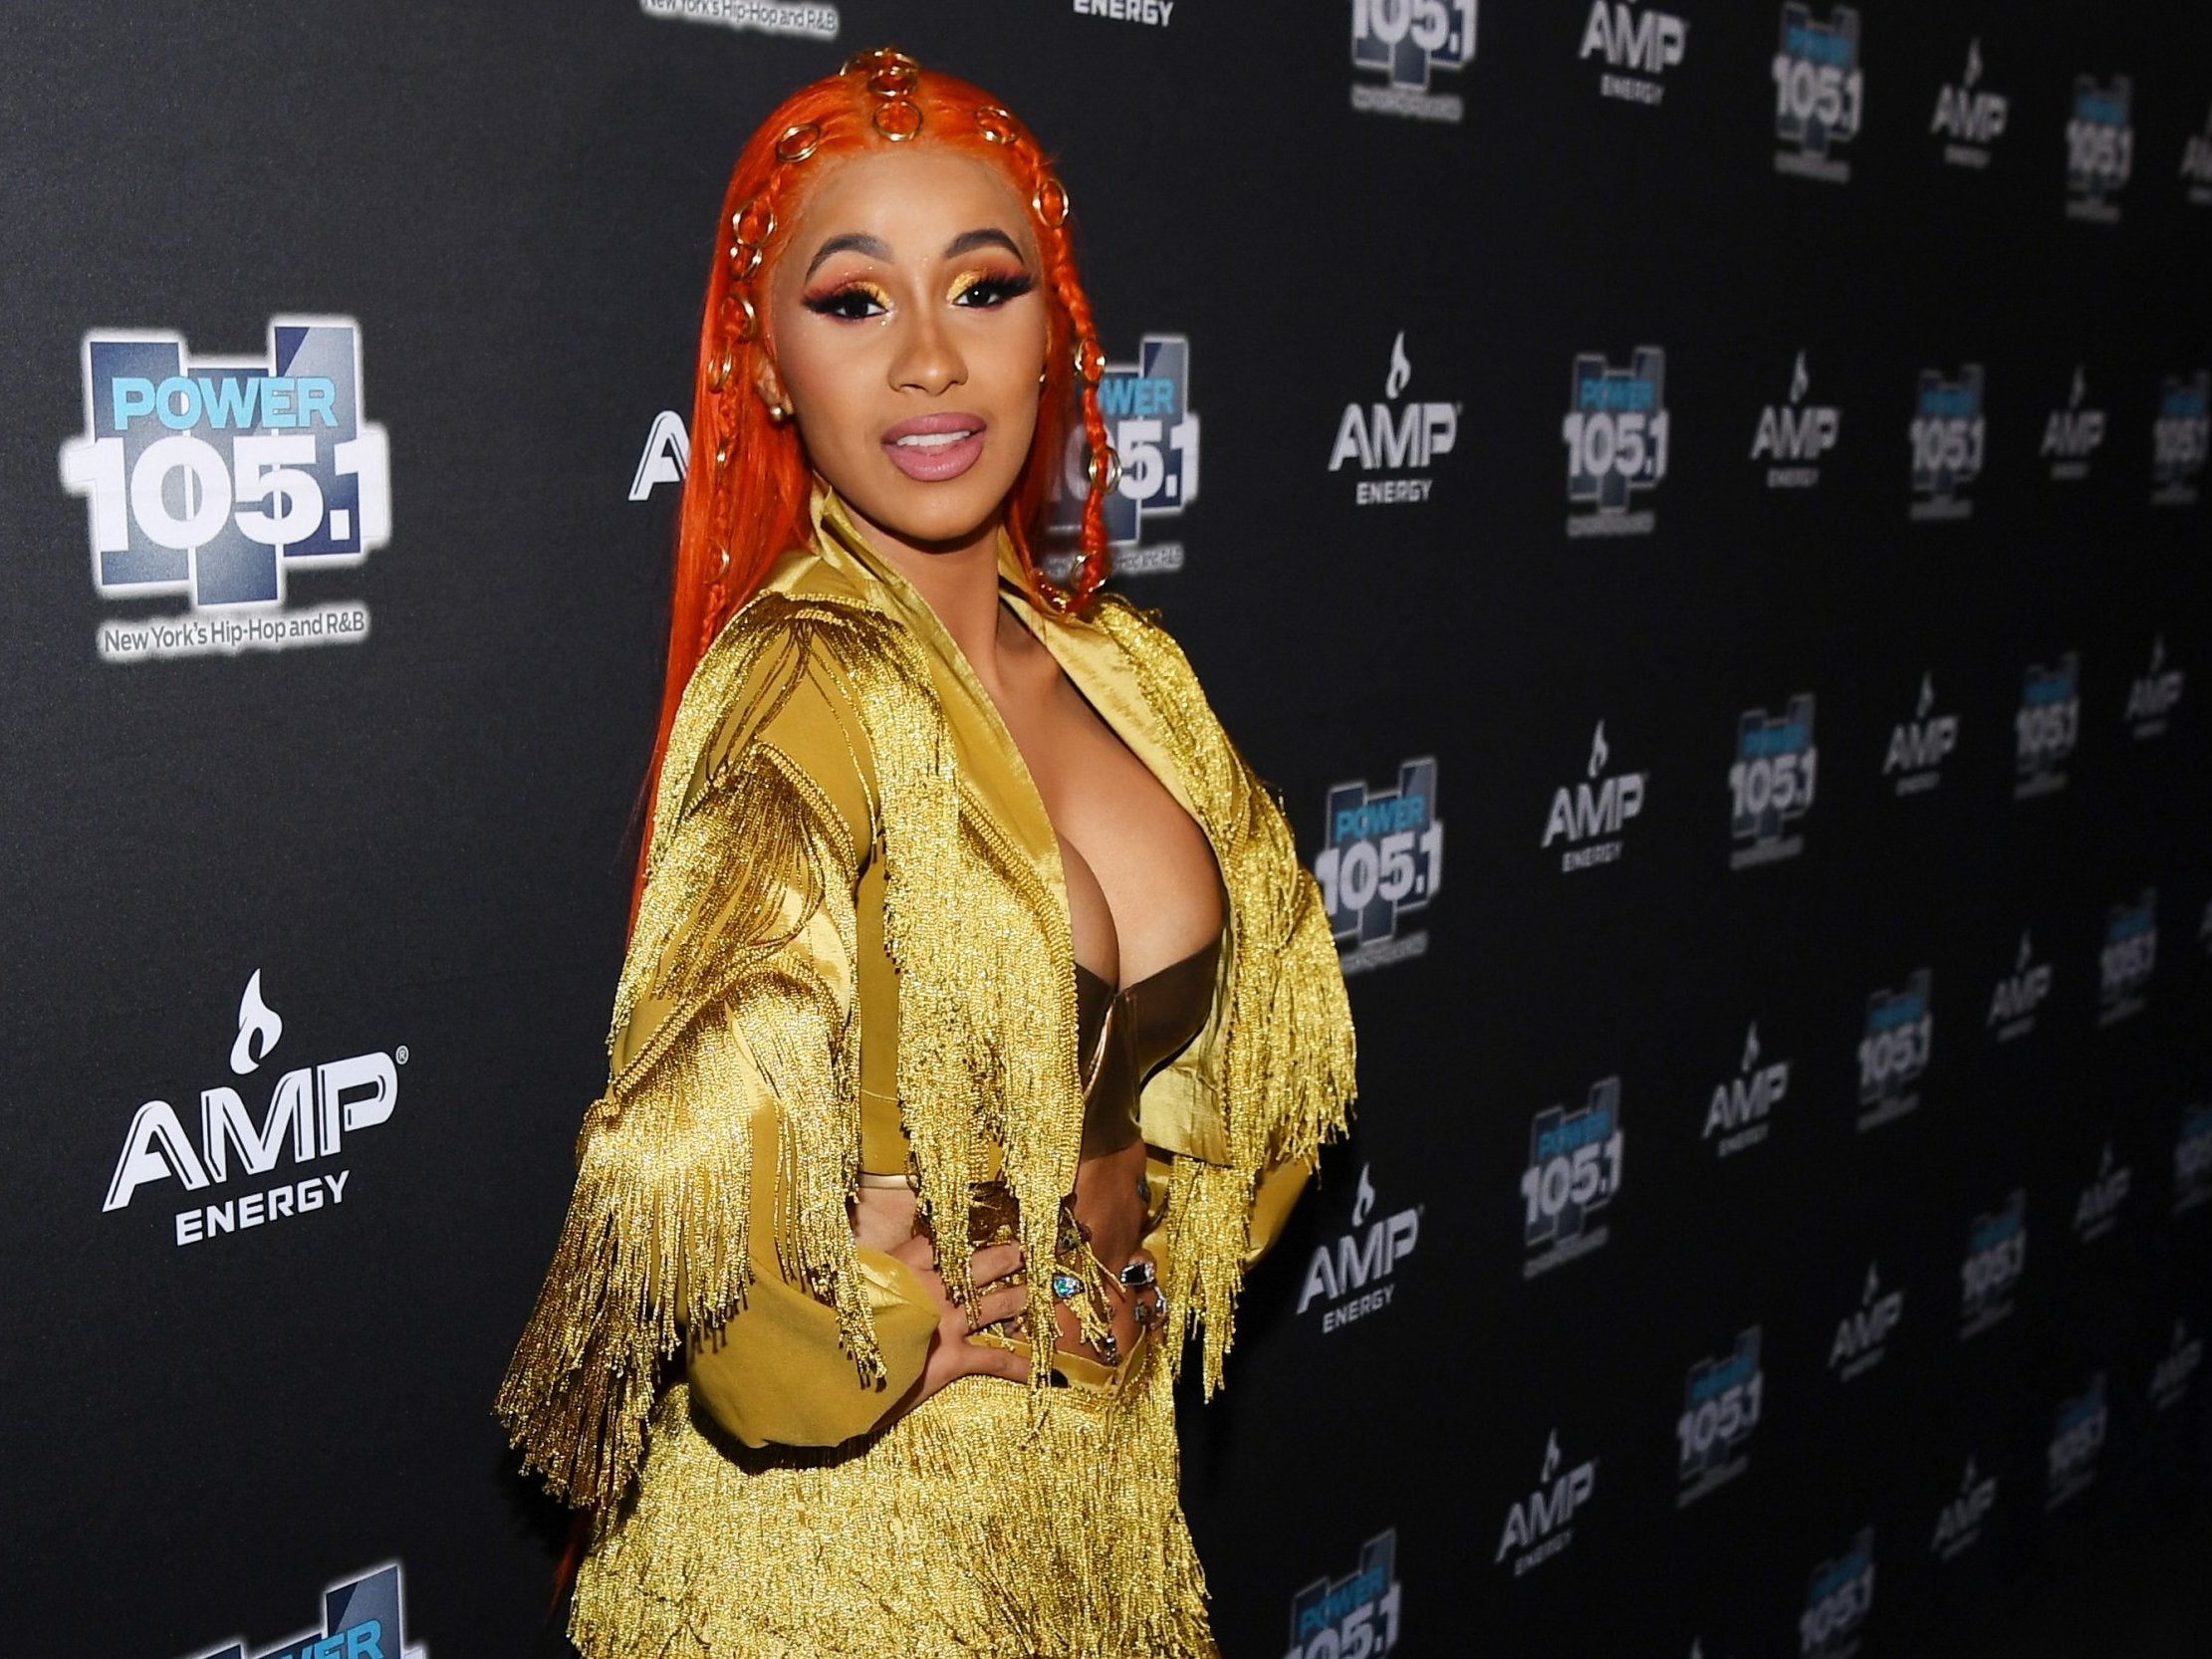 Cardi B shared her thoughts on the US government shutdown